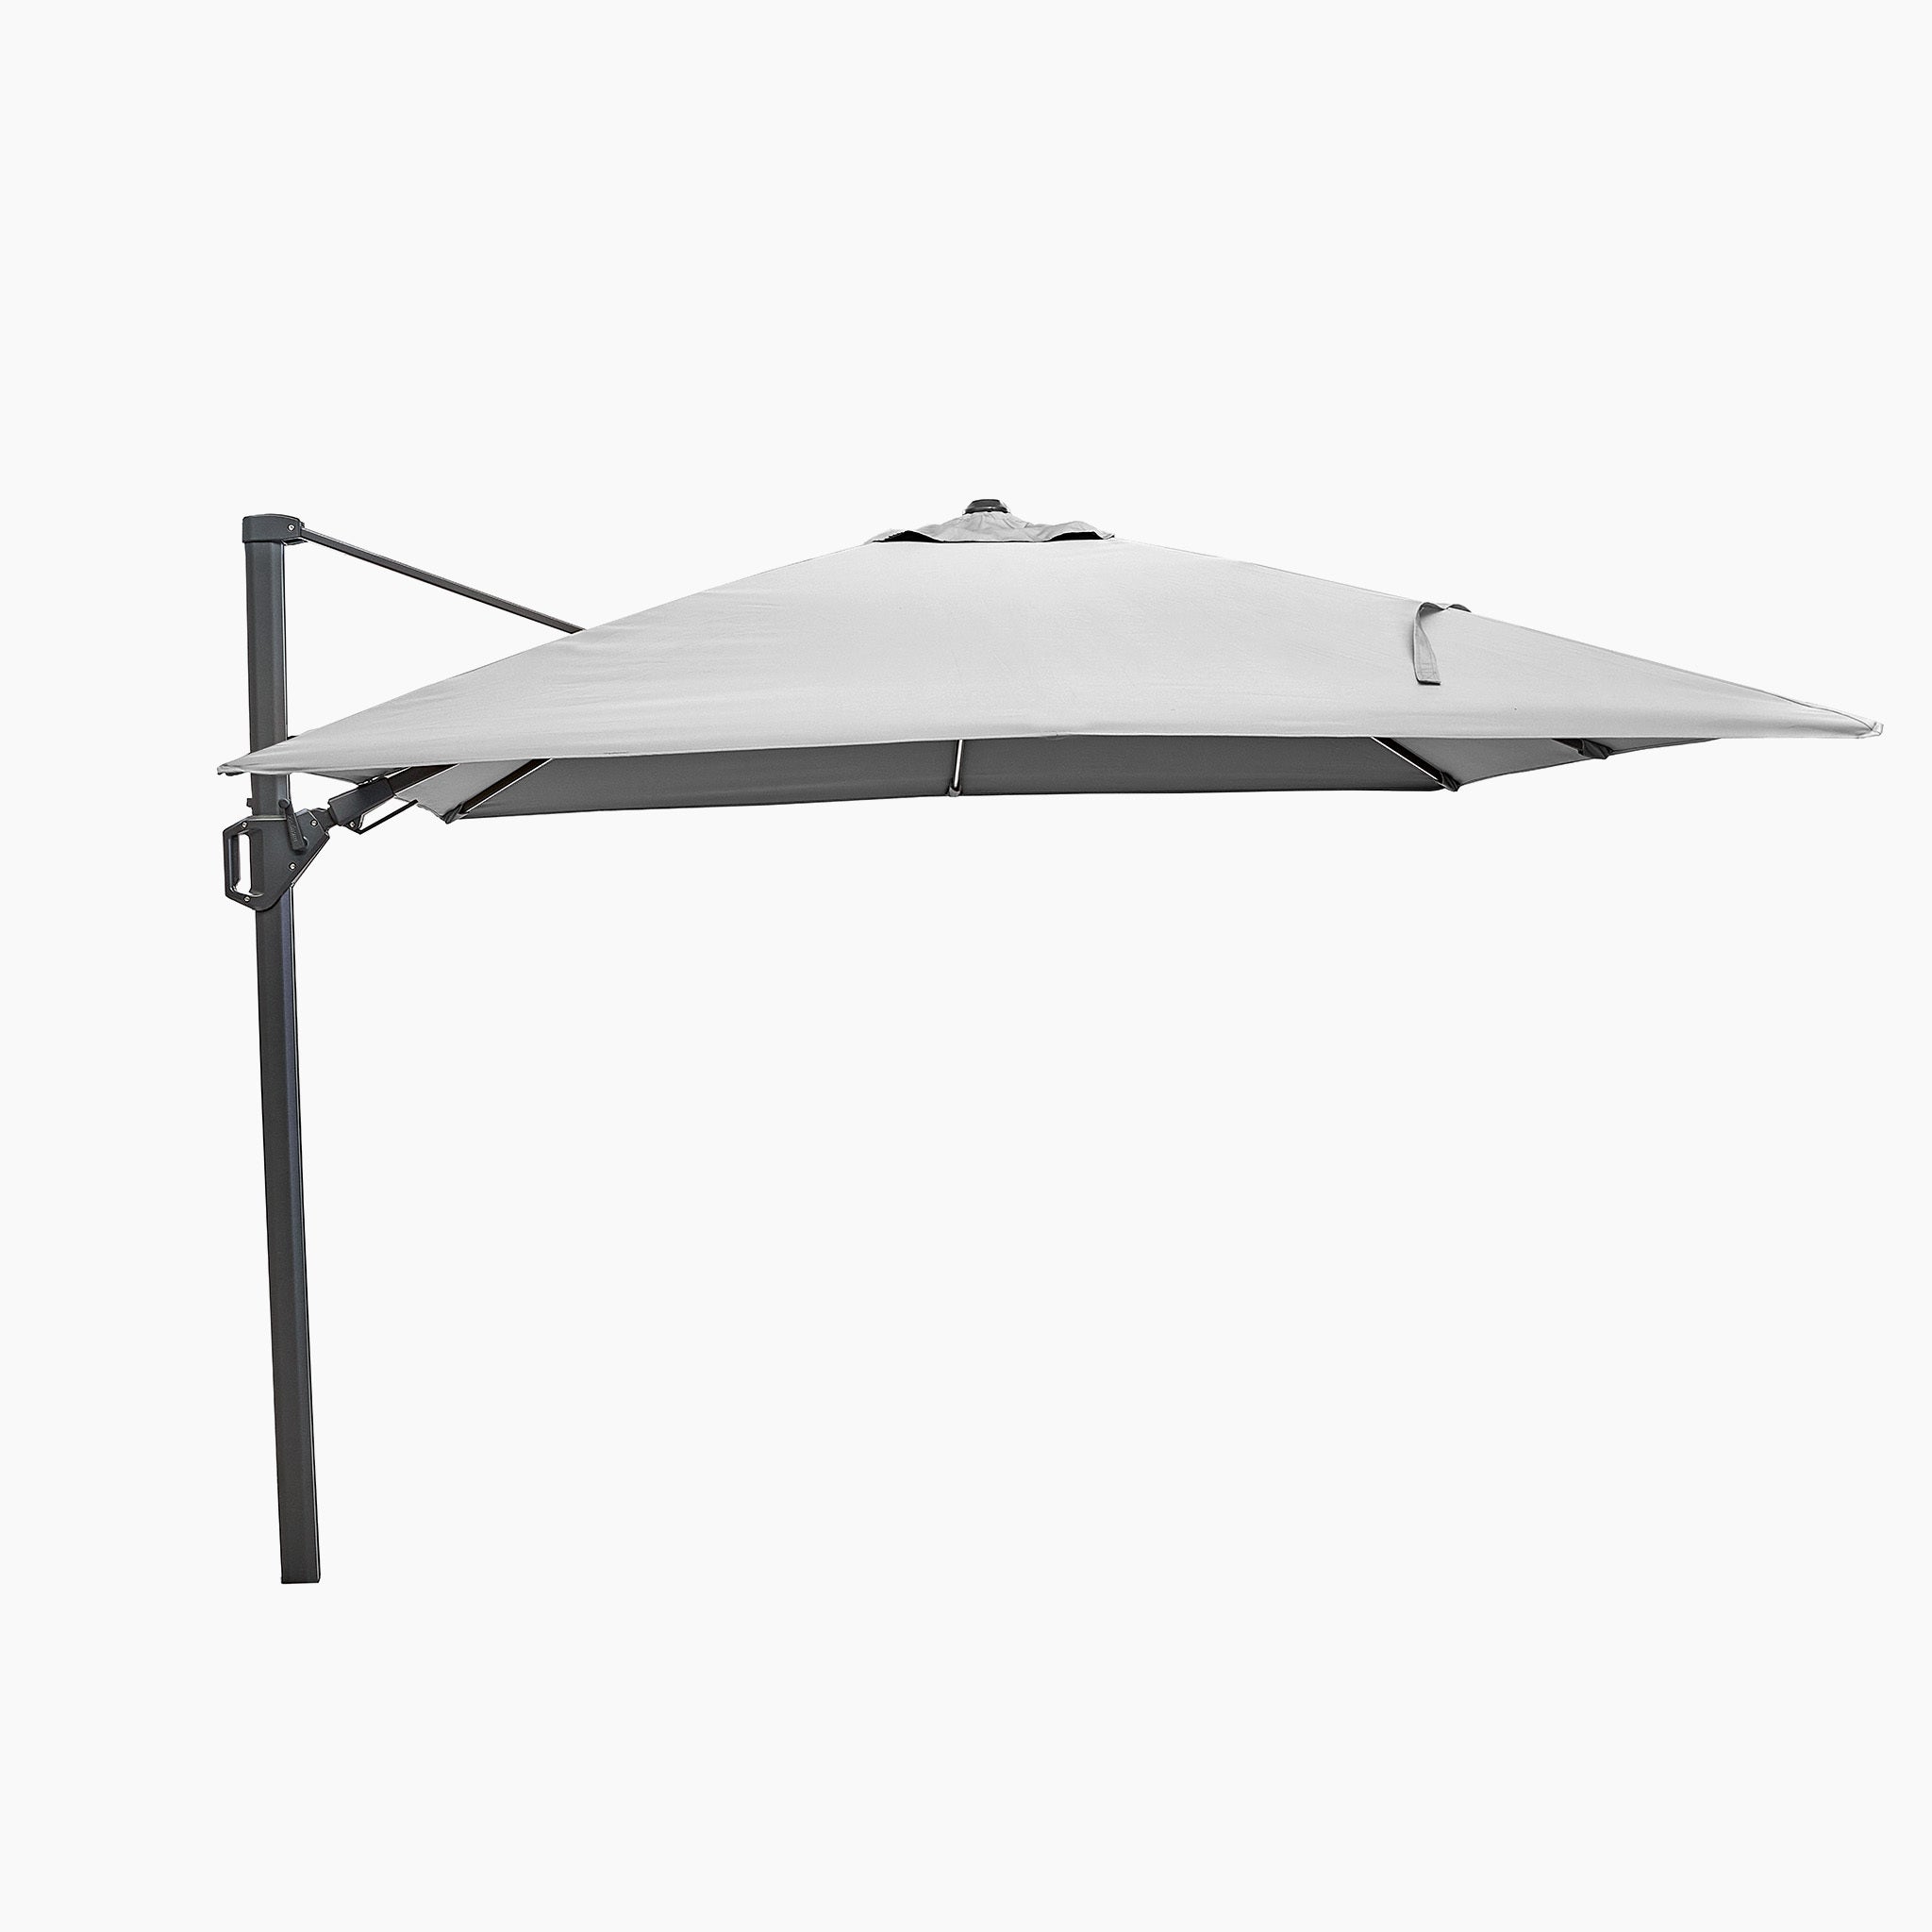 Glow Challenger T2 3m Square Cantilever Parasol in Grey